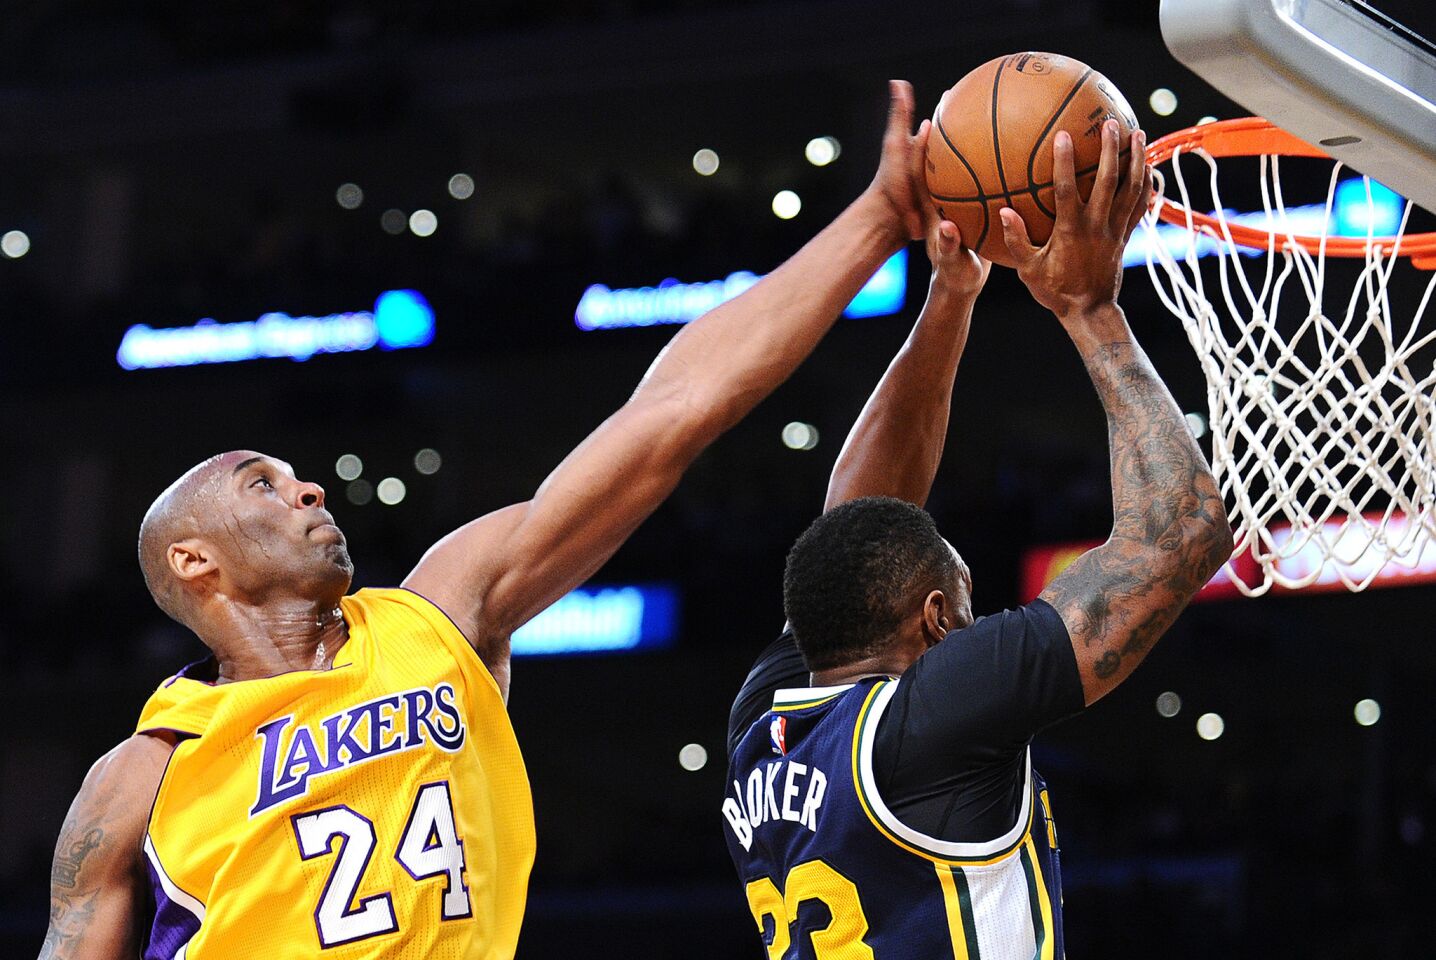 Kobe Bryant blocks a shot by Trevor Booker in his final game at Staples Center on Wednesday.